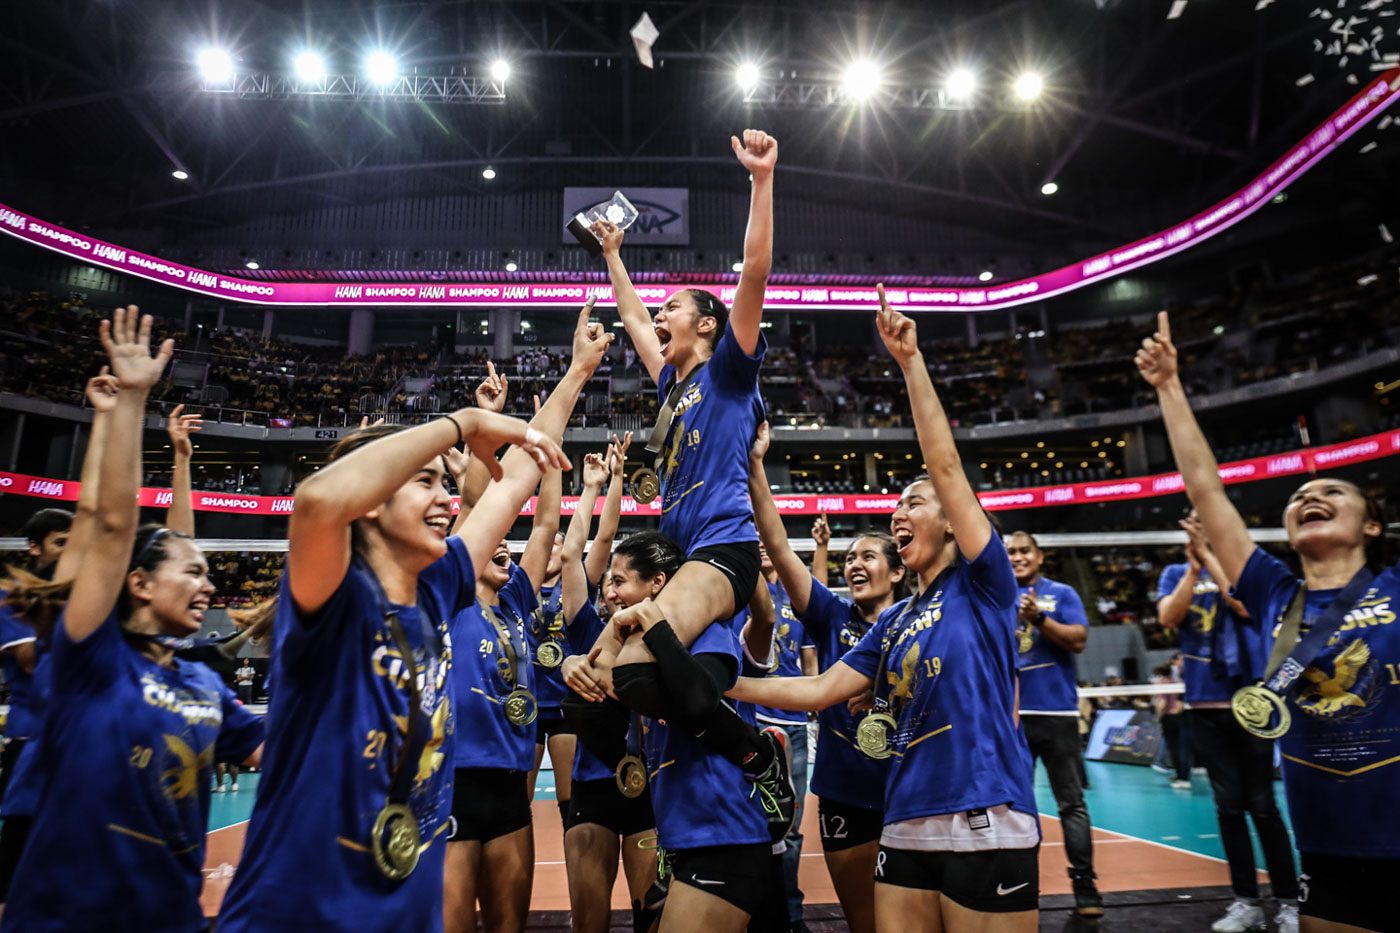 Ateneo gets last laugh after title win: ‘People counted us out’